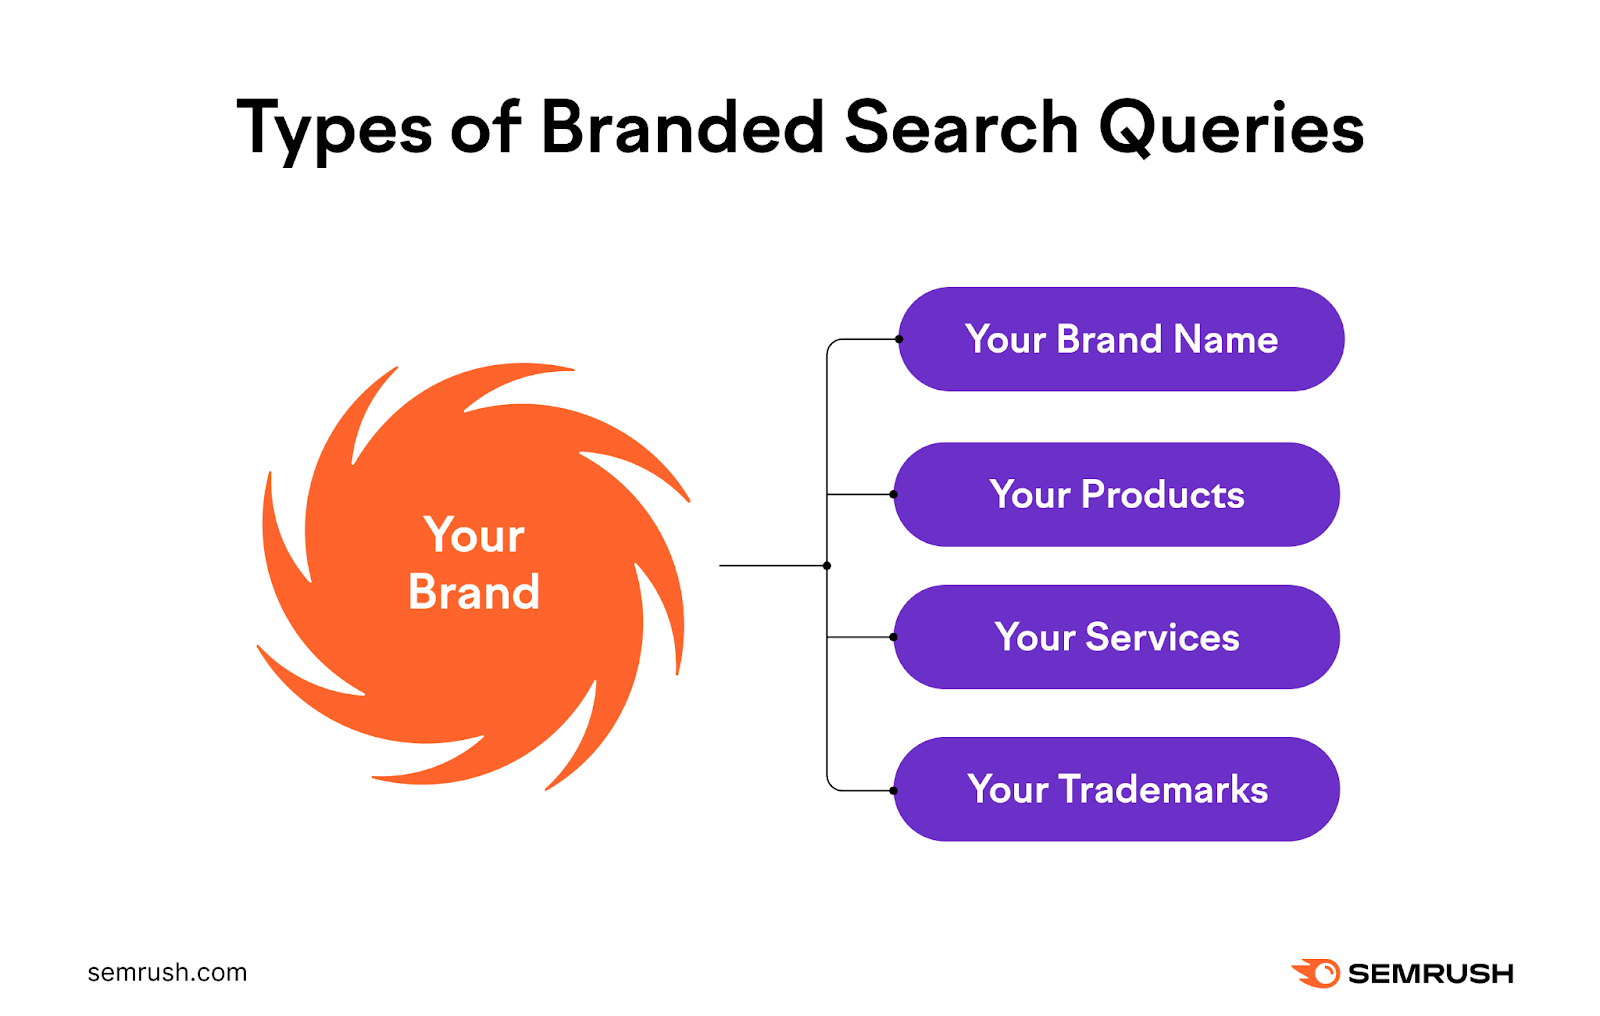 Types of branded search queries: your brand name, products, services and trademarks.